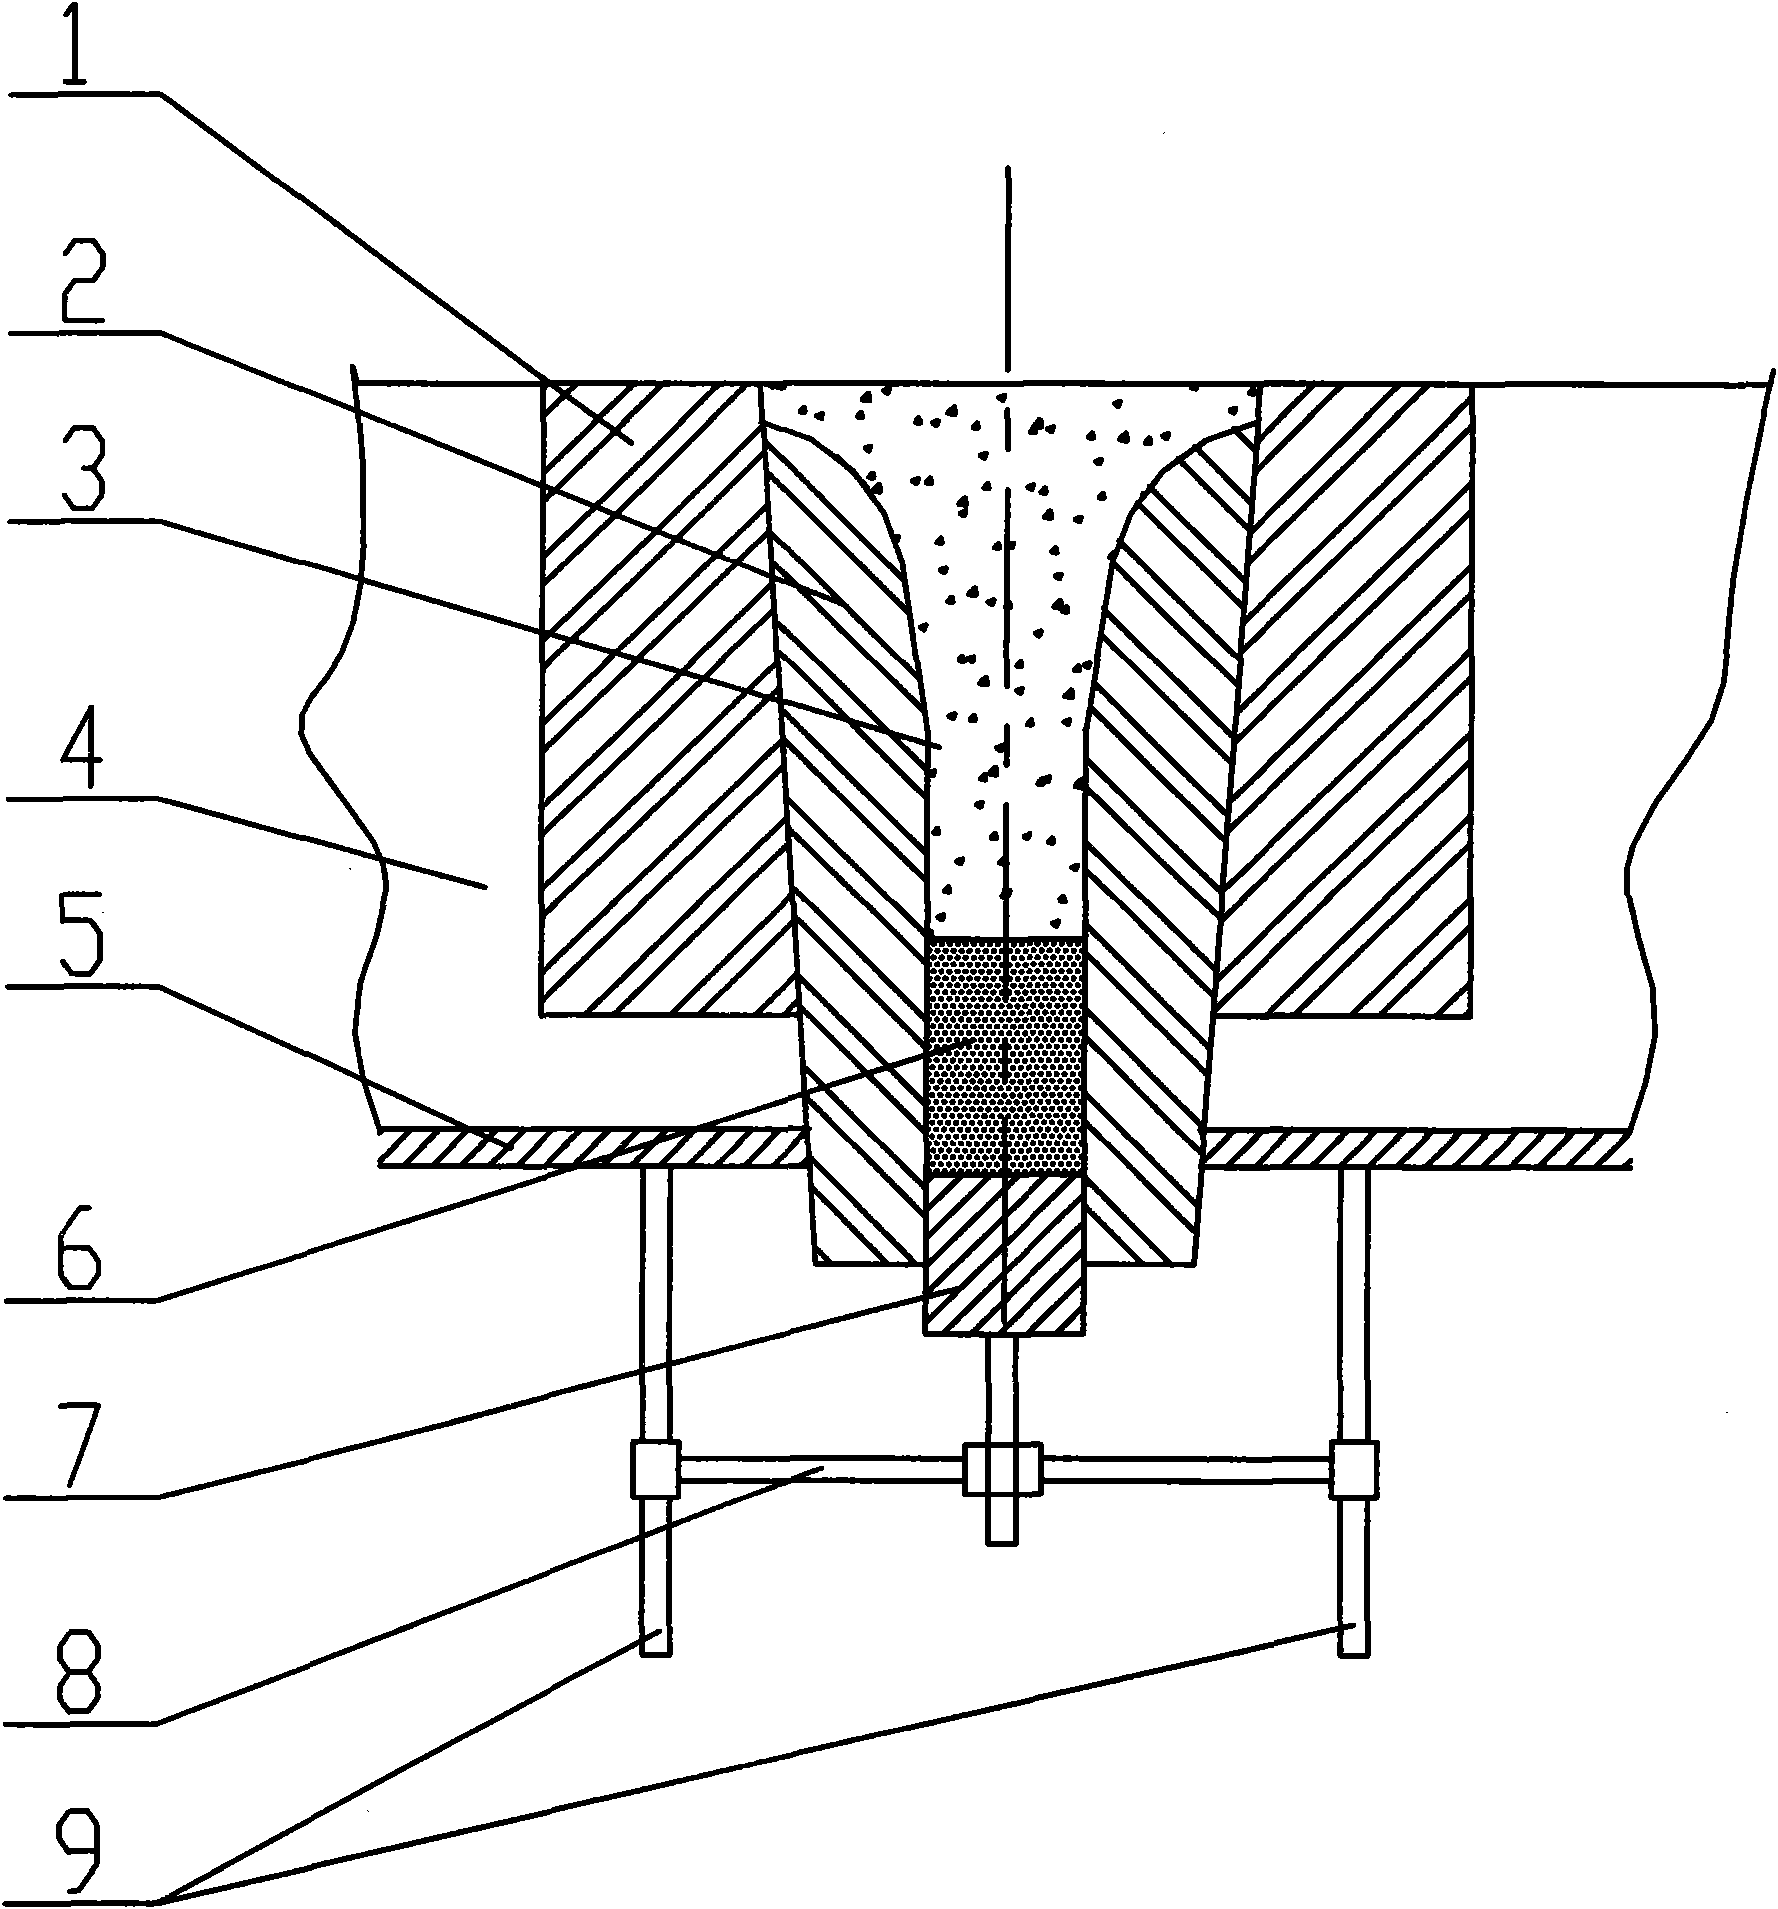 Nozzle structure at bottom of refining furnace and nozzle filling method